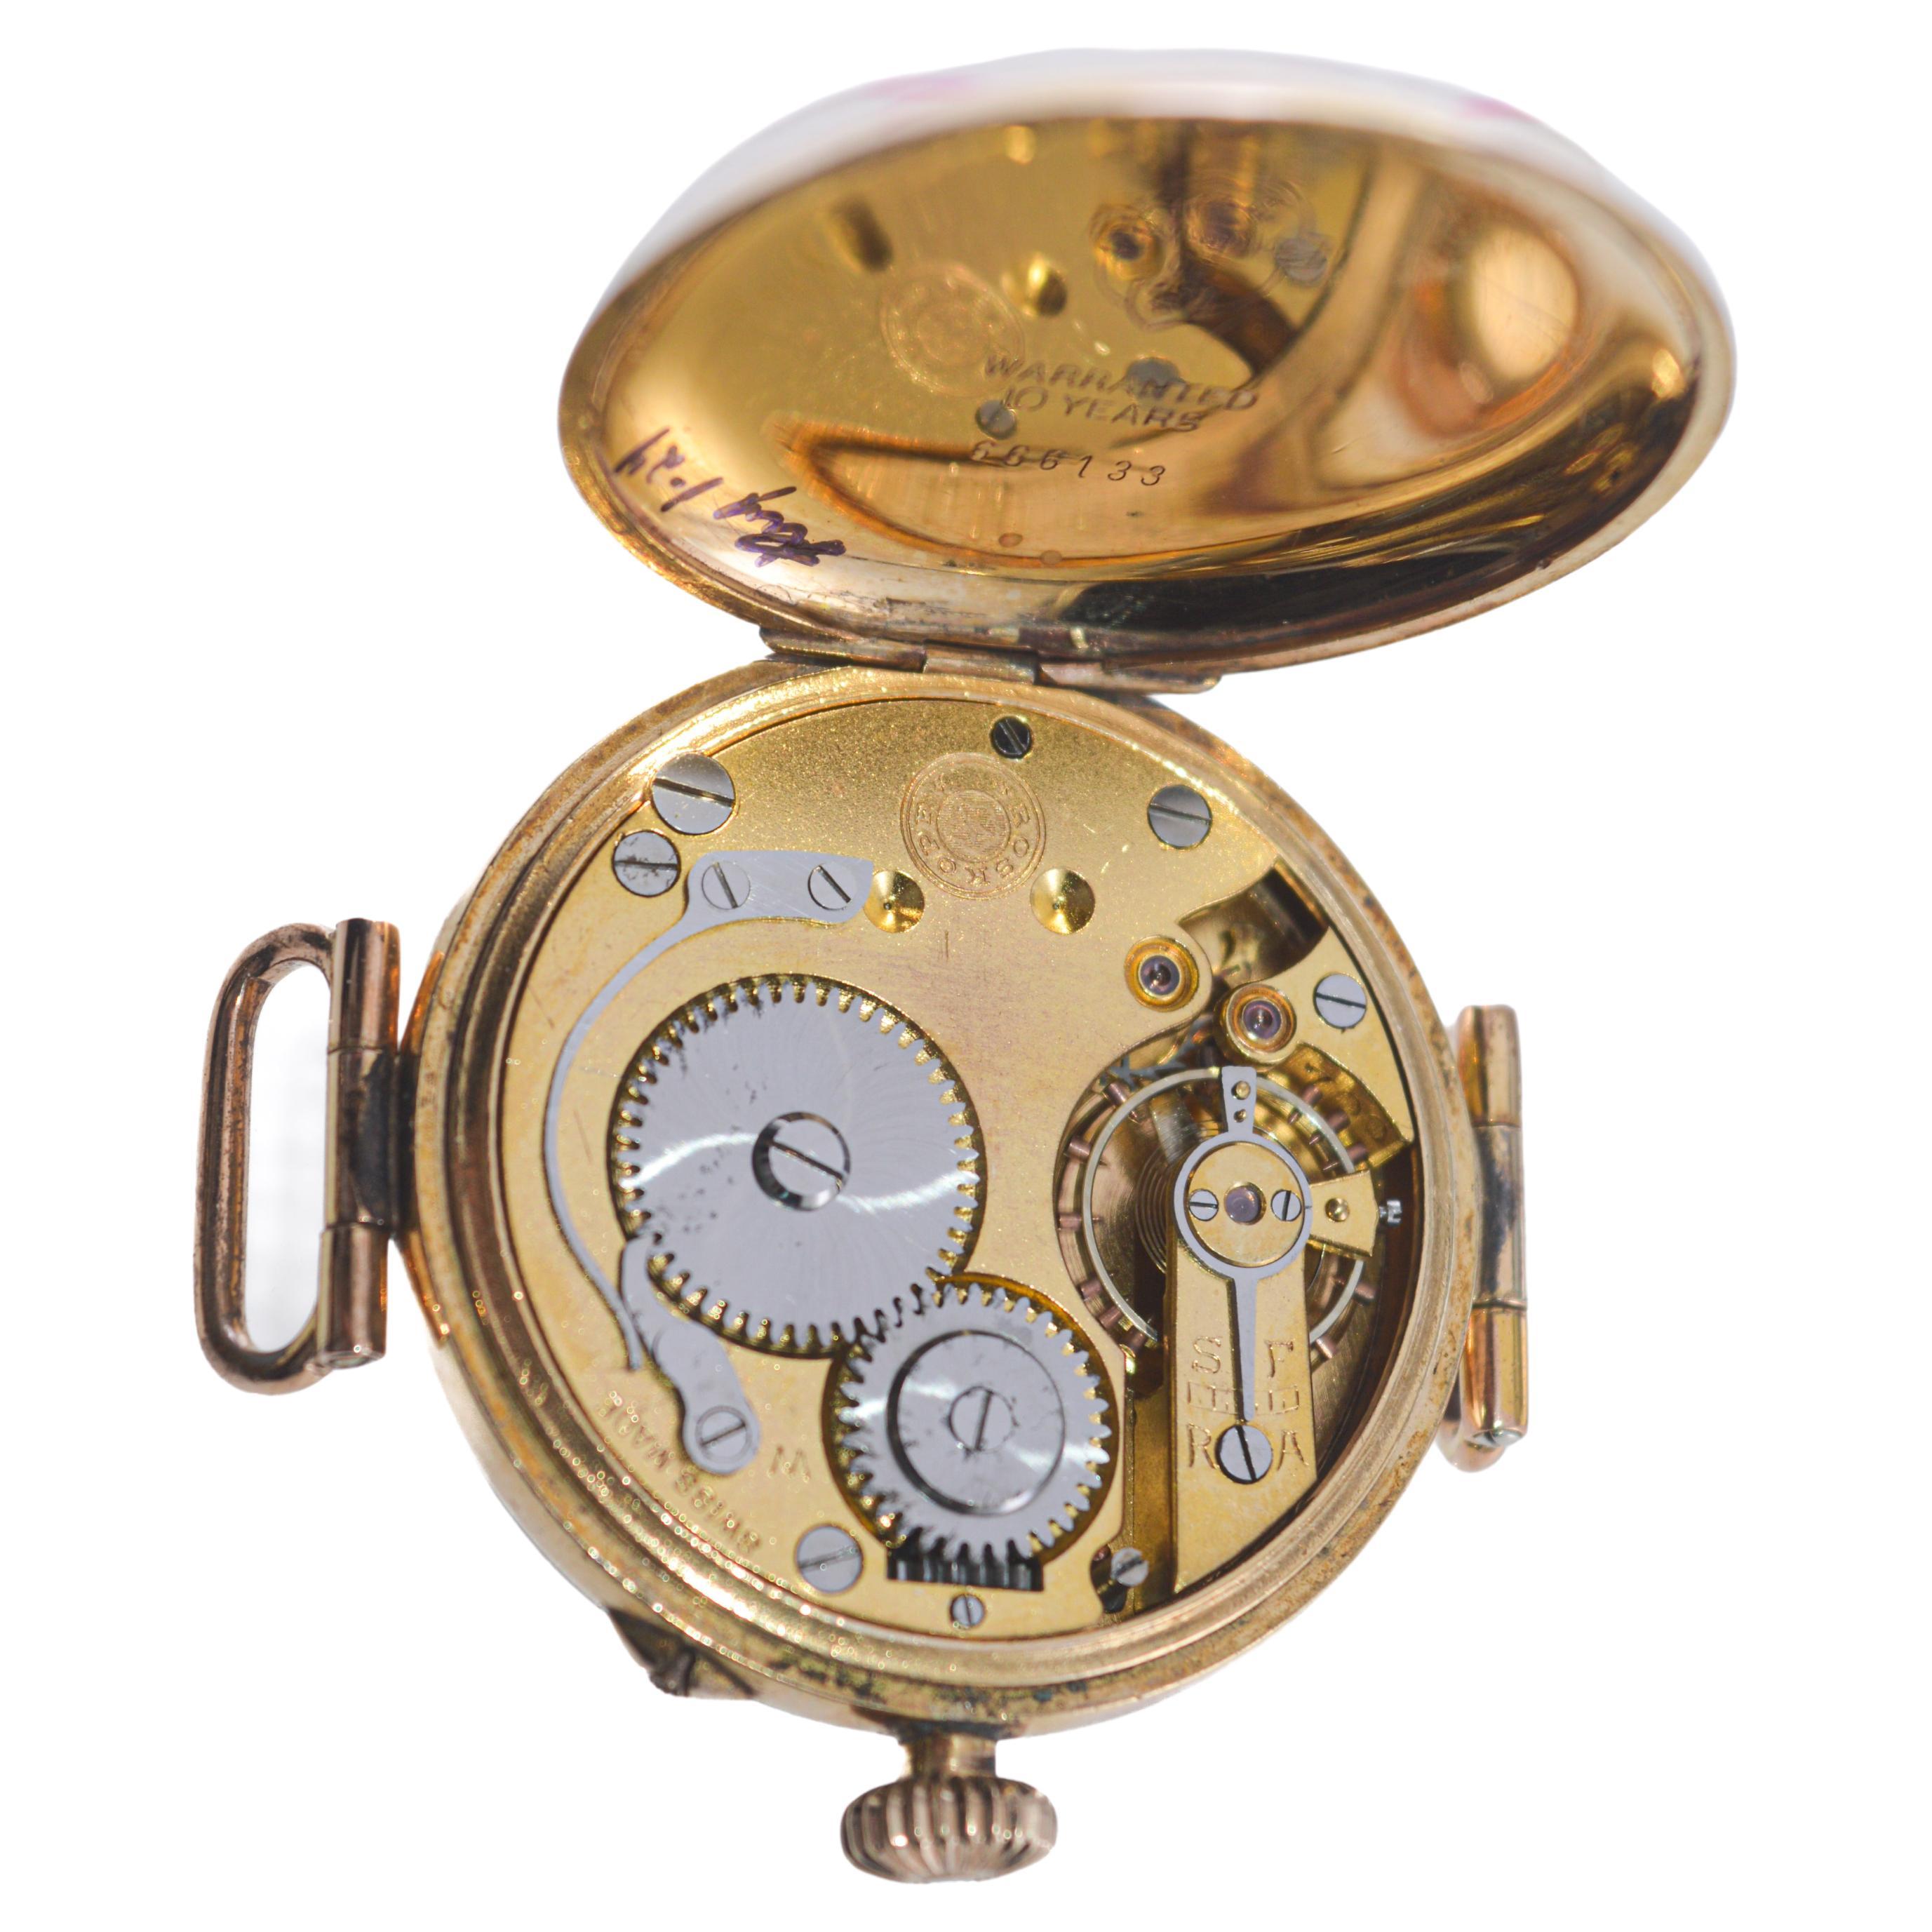 Roskopf Gold-Filled Campaign Style with Original Flawless Enamel Dial Circa 1910 For Sale 9